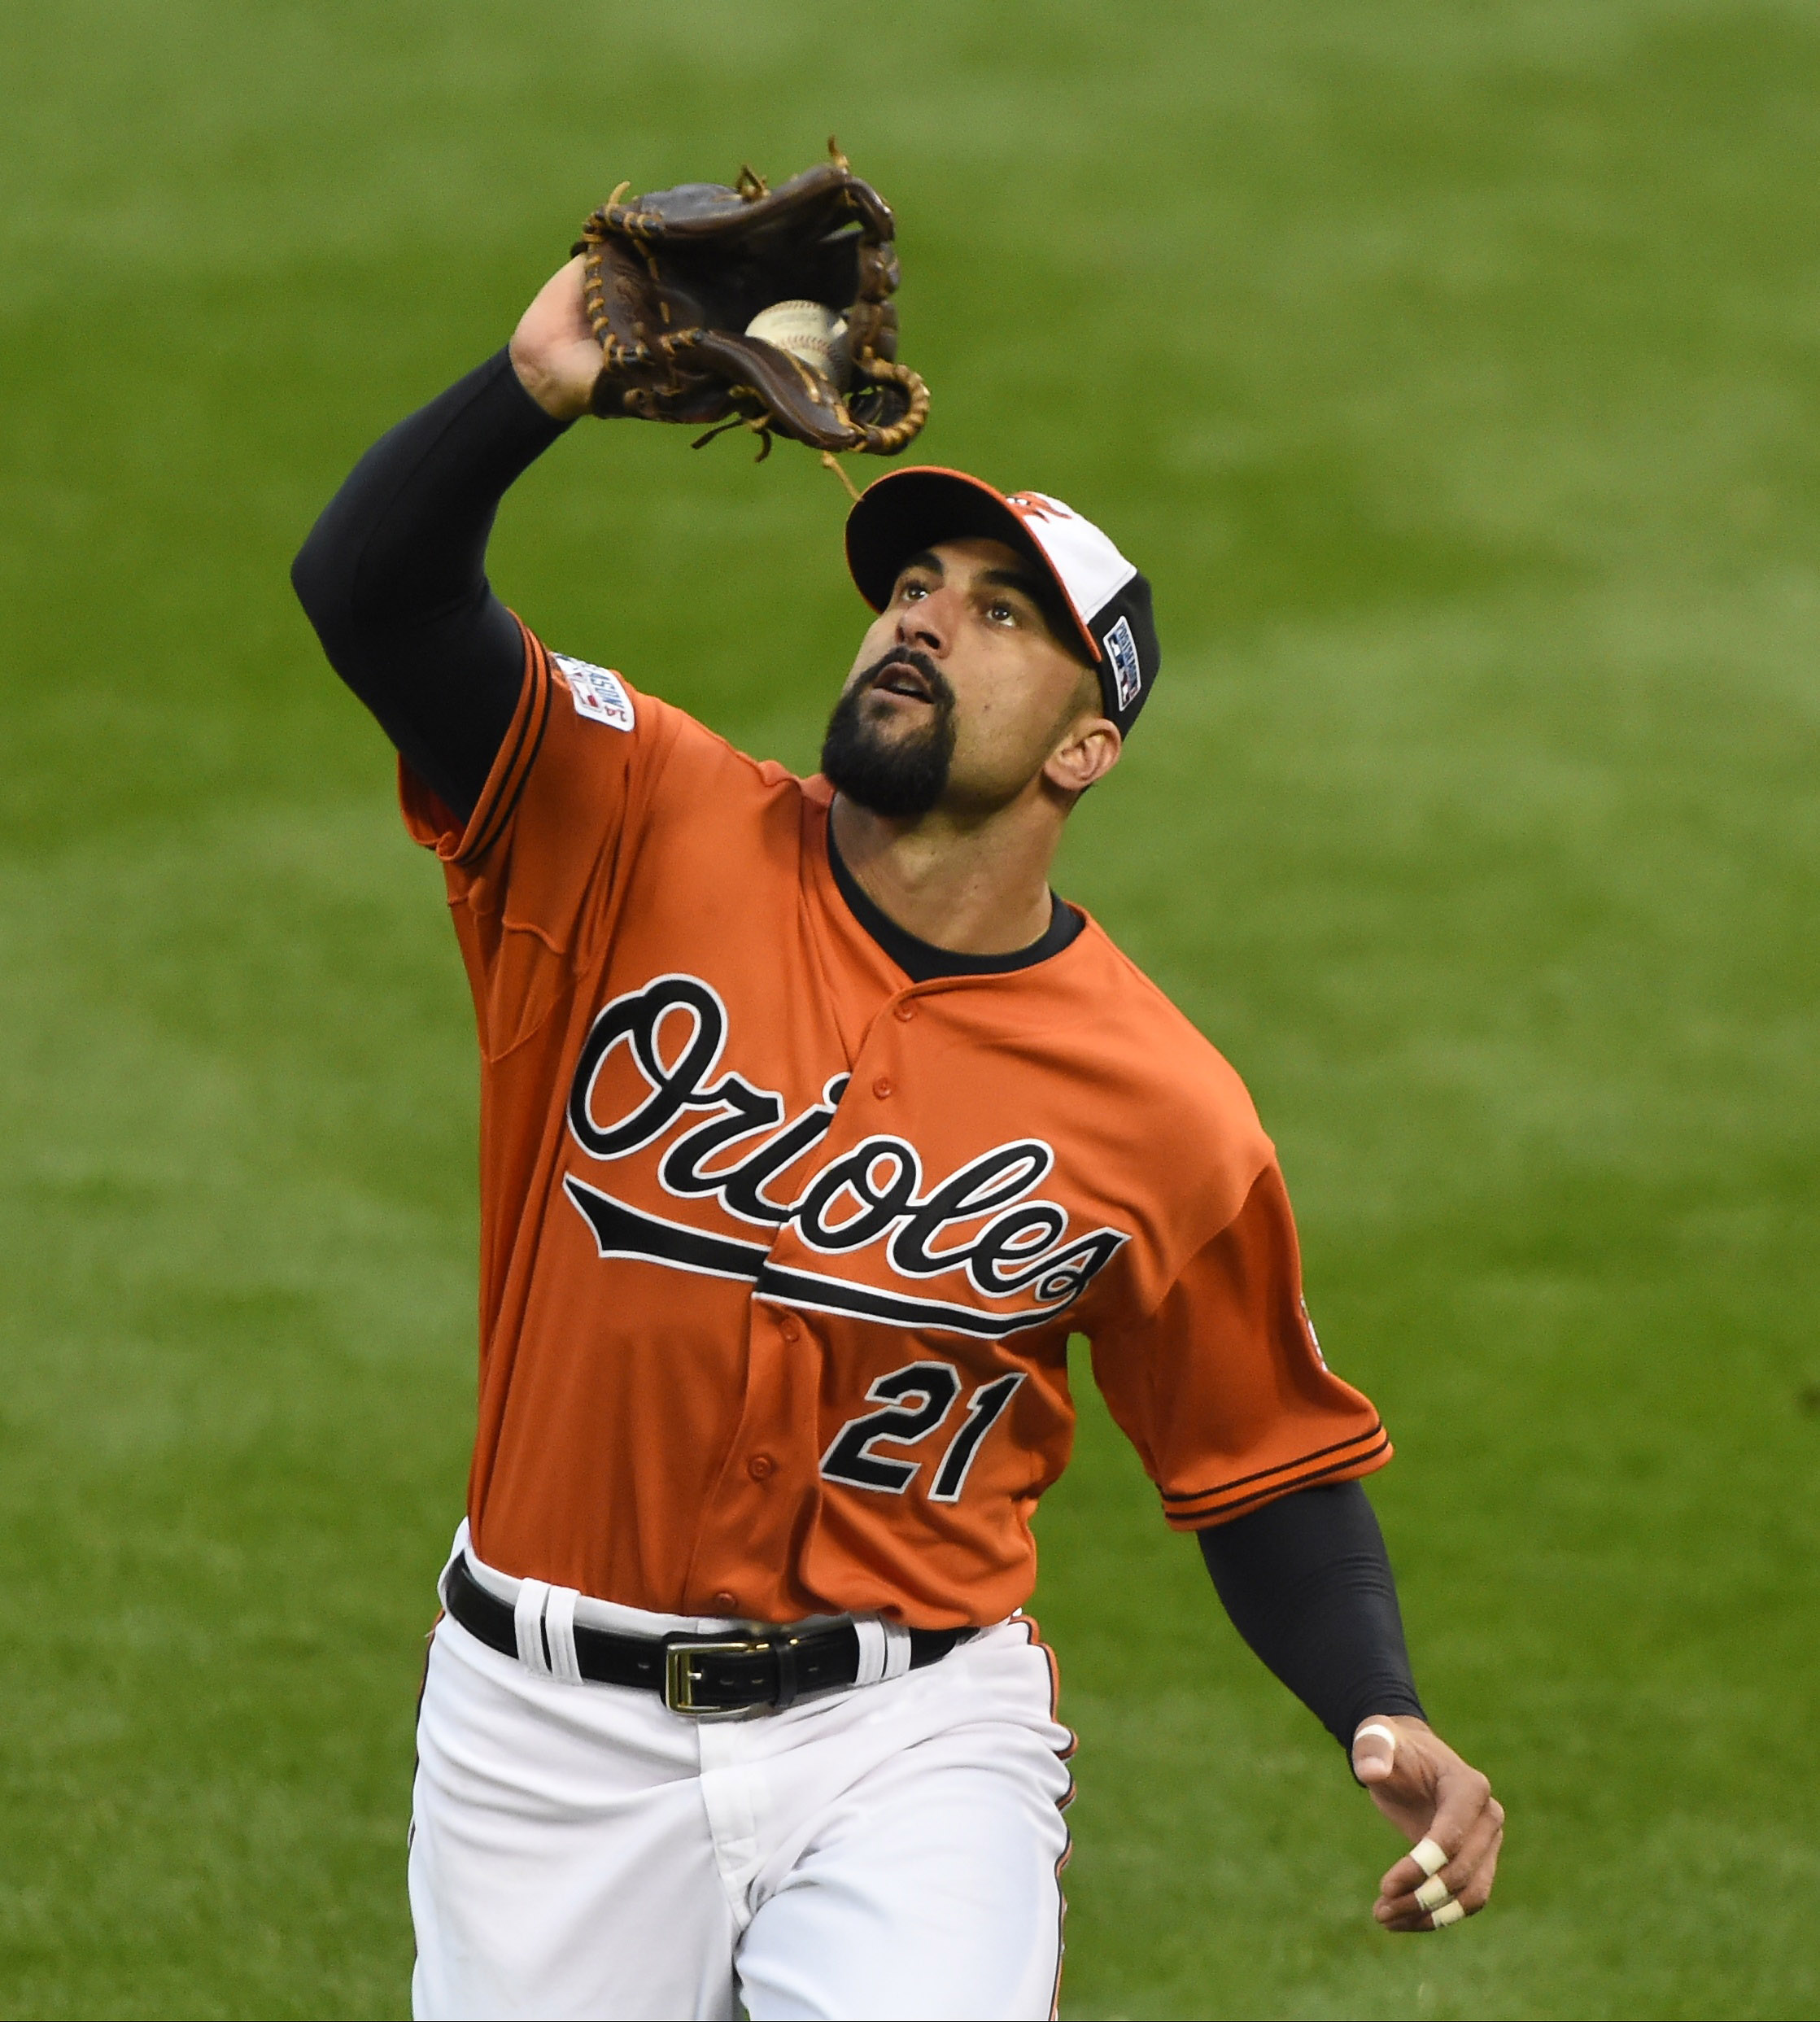 Nick Markakis doesn't mind pay cut to rejoin Braves